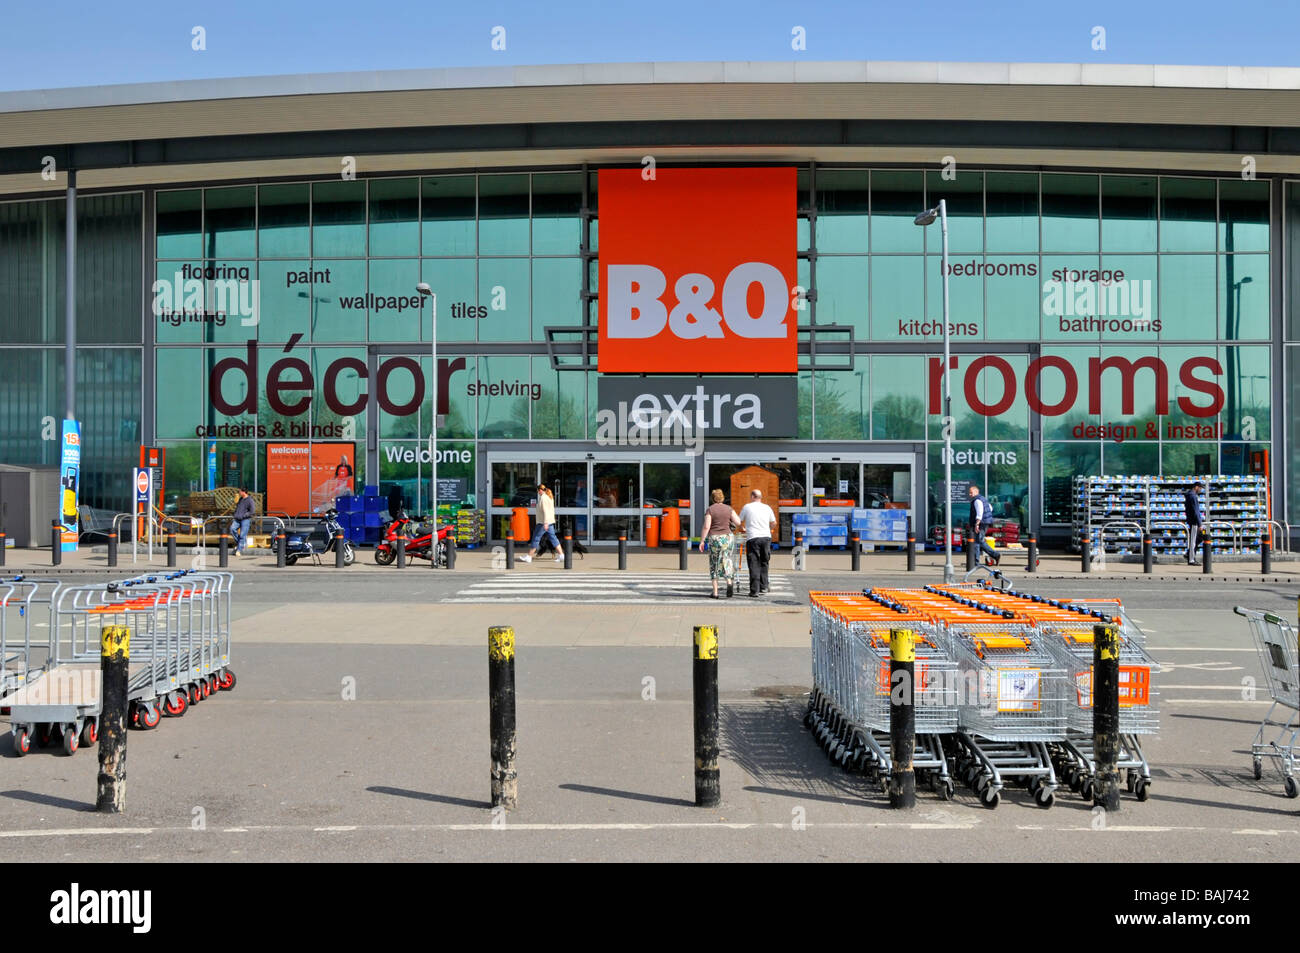 B&Q Extra a DIY store business front facade supermarket trolleys people & shopping customers security bollards Greenwich retail park London England UK Stock Photo